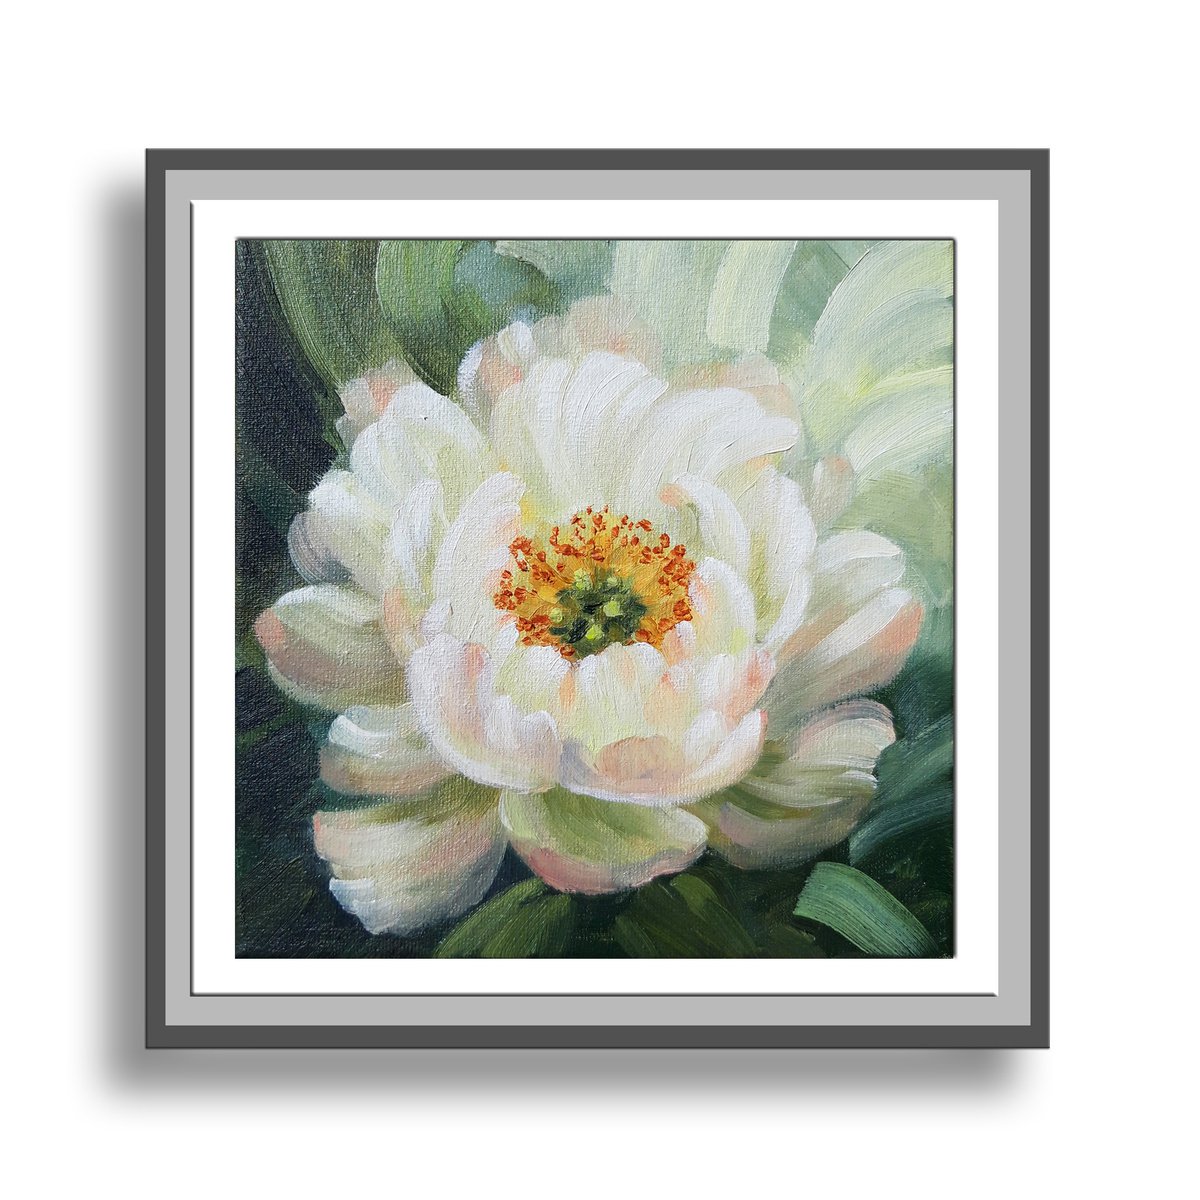 White peony, small floral oil painting, flowers art by Anna Steshenko